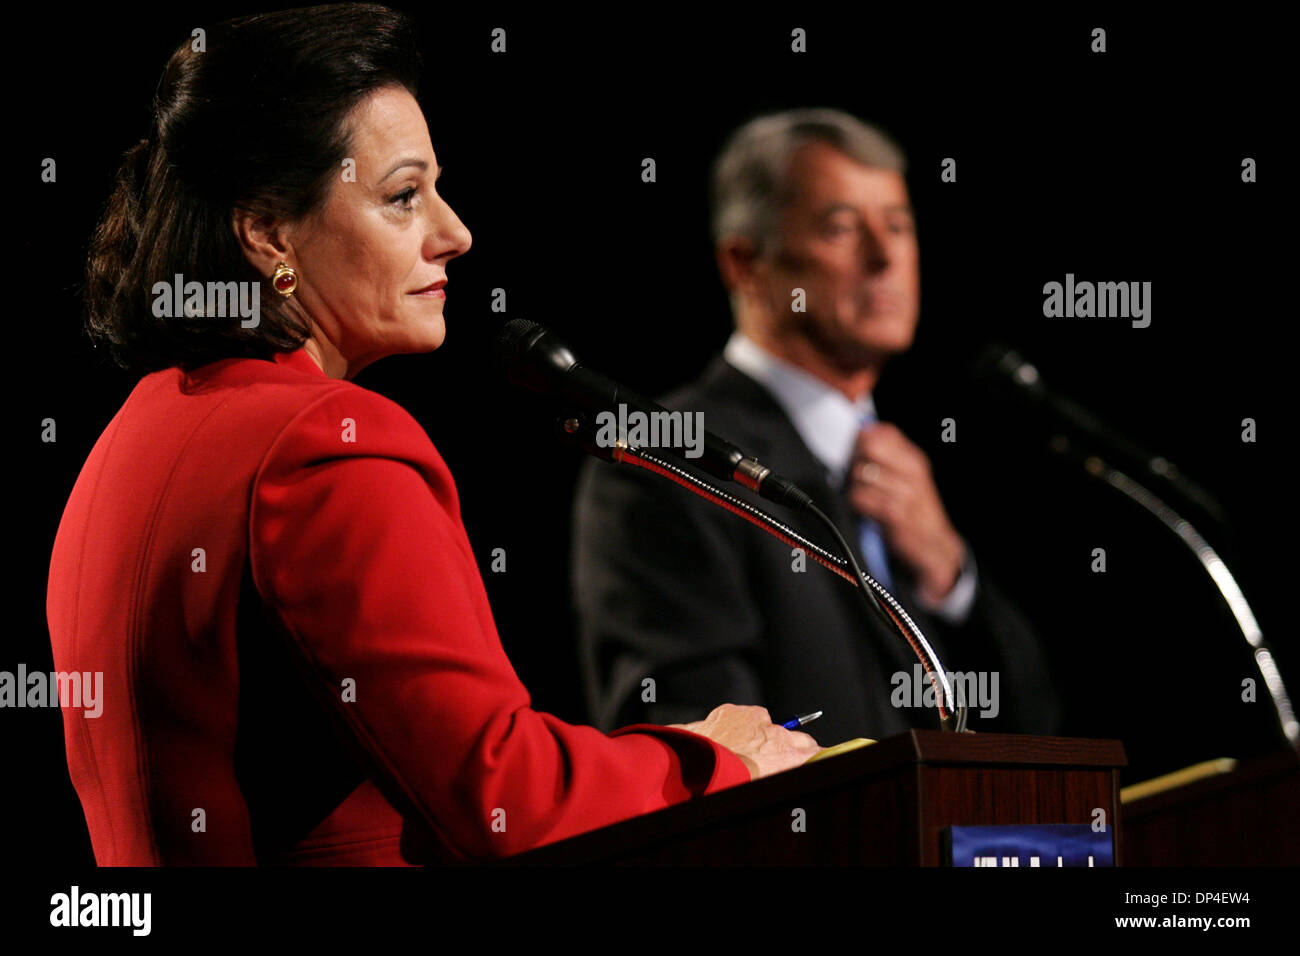 Aug 09, 2006; New York, New York, USA; Republican Senate candidates KATHLEEN TROIA 'KT' MCFARLAND and JOHN SPENCER face off during their second debate at the campus of Pace University in New York City on Wednesday. McFarland, a former Reagan-era Pentagon official (deputy assistant secretary of defense for public affairs) and Spencer, a former mayor of Yonkers, NY, are seeking to un Stock Photo